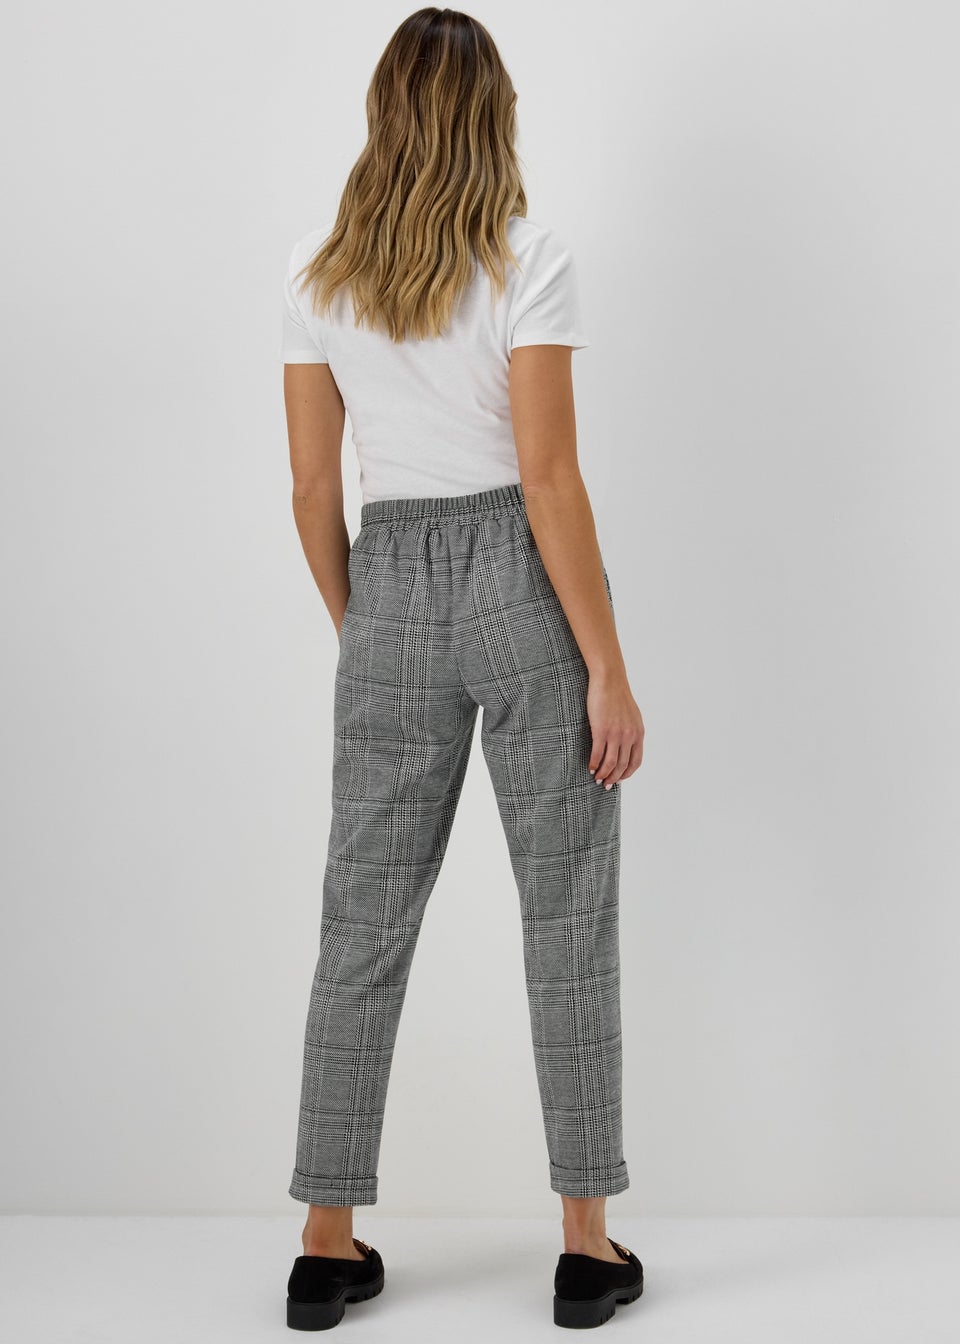 Grey Check Trousers